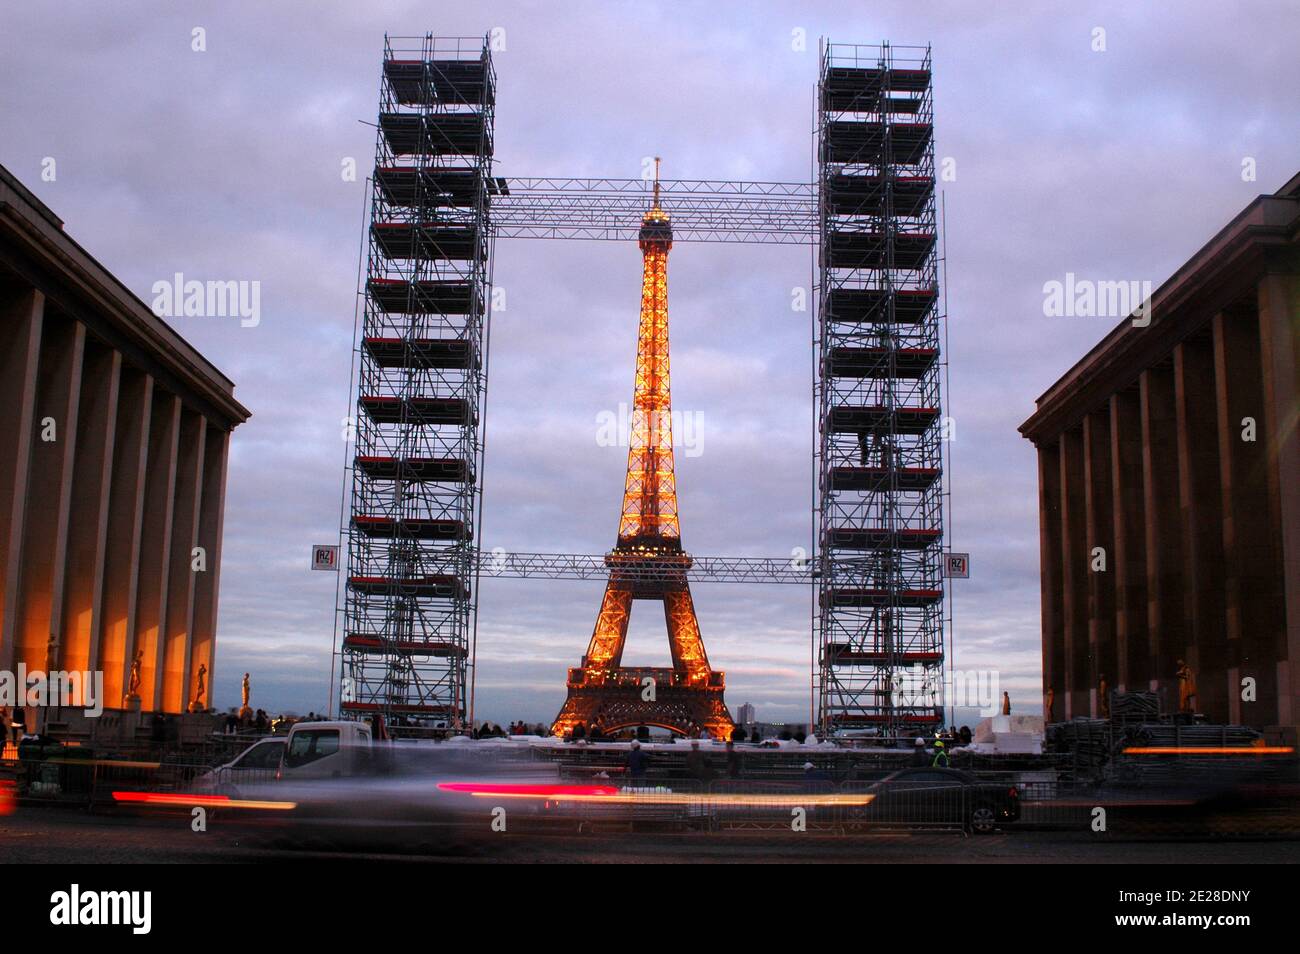 A replica of the Twin Towers is being built on Trocadero Square in front of the Eiffel Tower in Paris, France on September 9, 2011 to mark the 10th anniversary of the attacks in New York City. Photo by Alain Apaydin/ABACAPRESS.COM Stock Photo